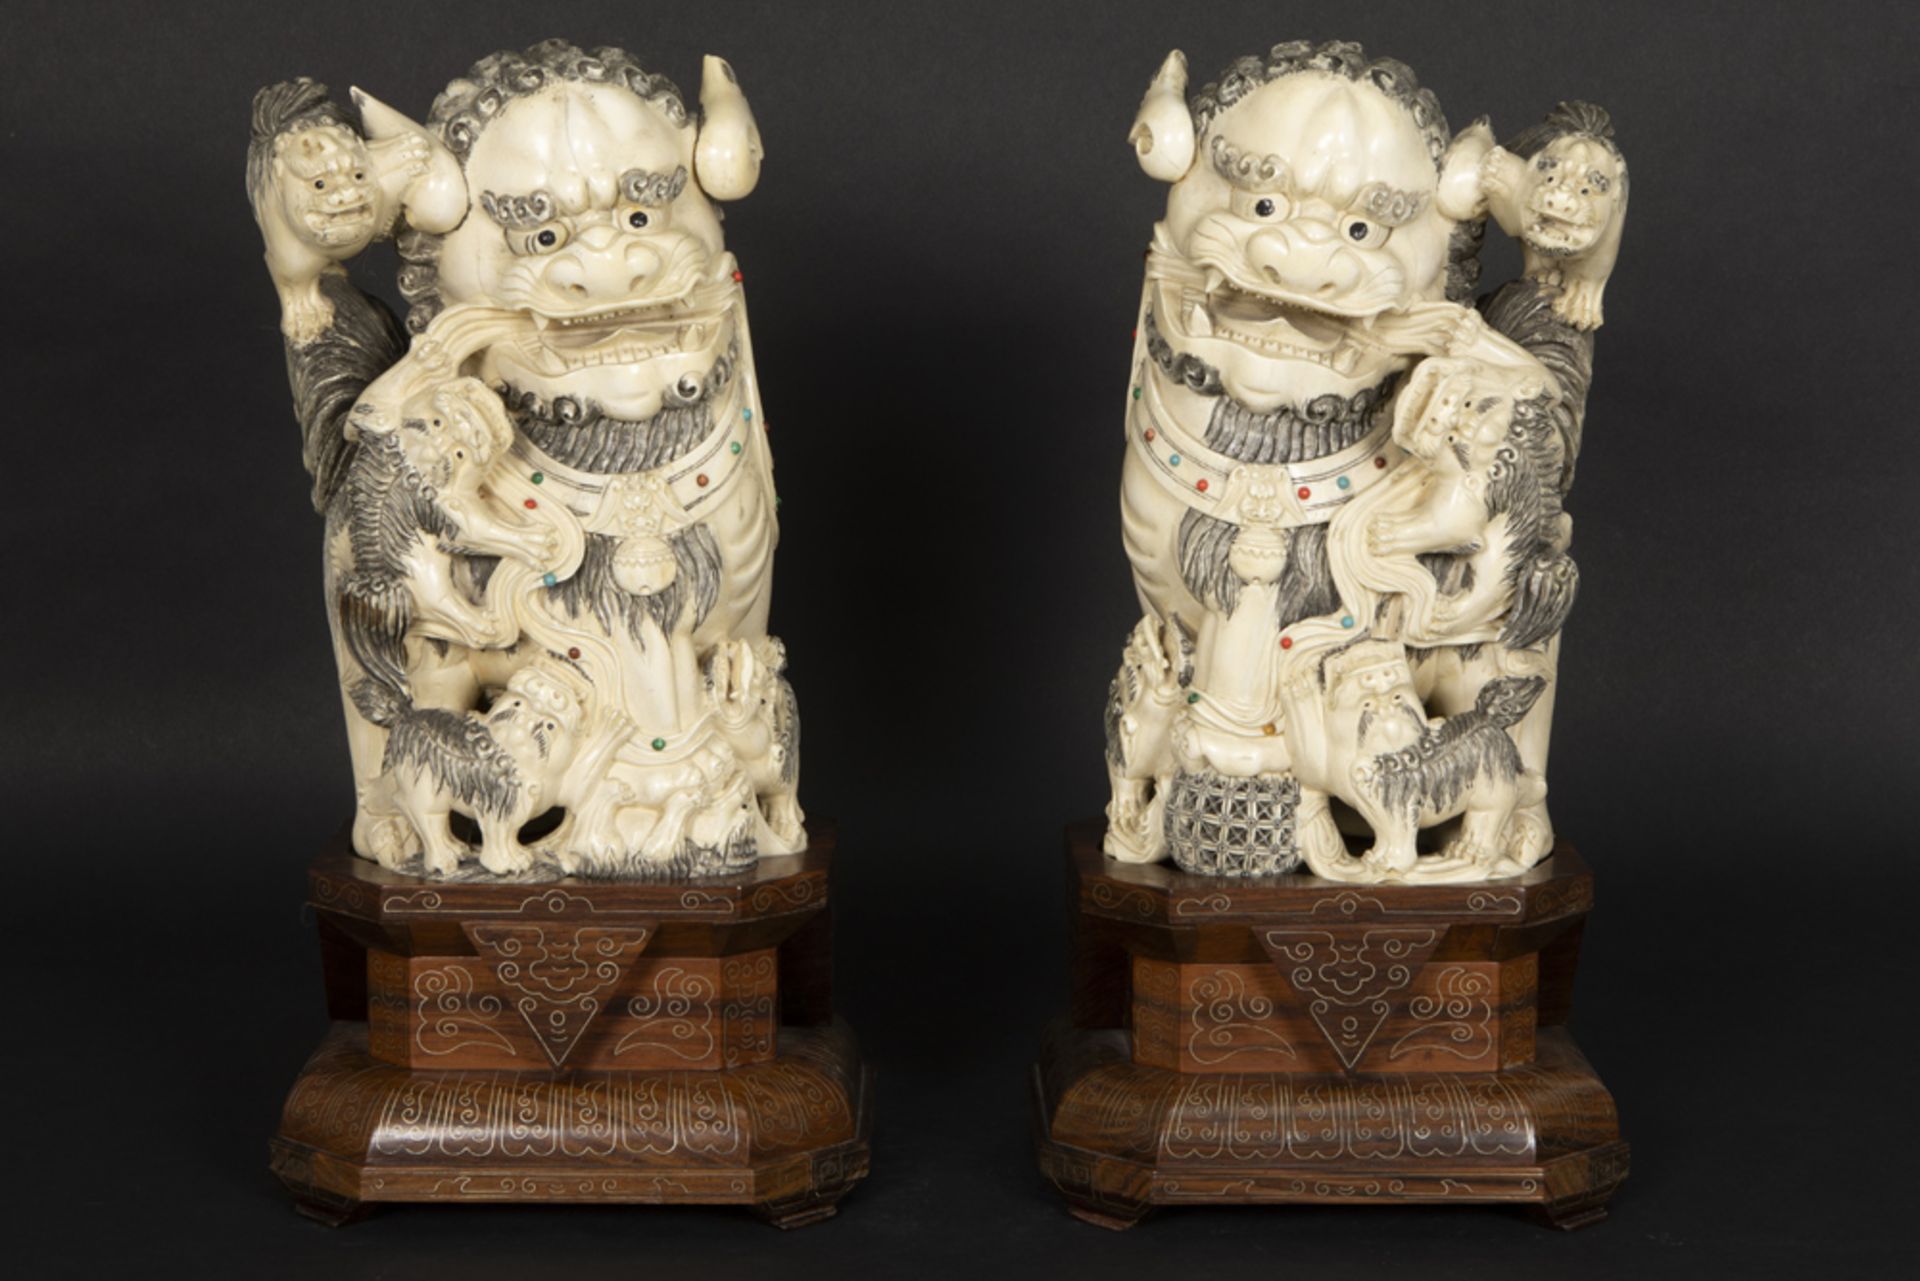 pair of antique Chinese Qing period sculptures in ivory with inlaid cabochons of several kinds of